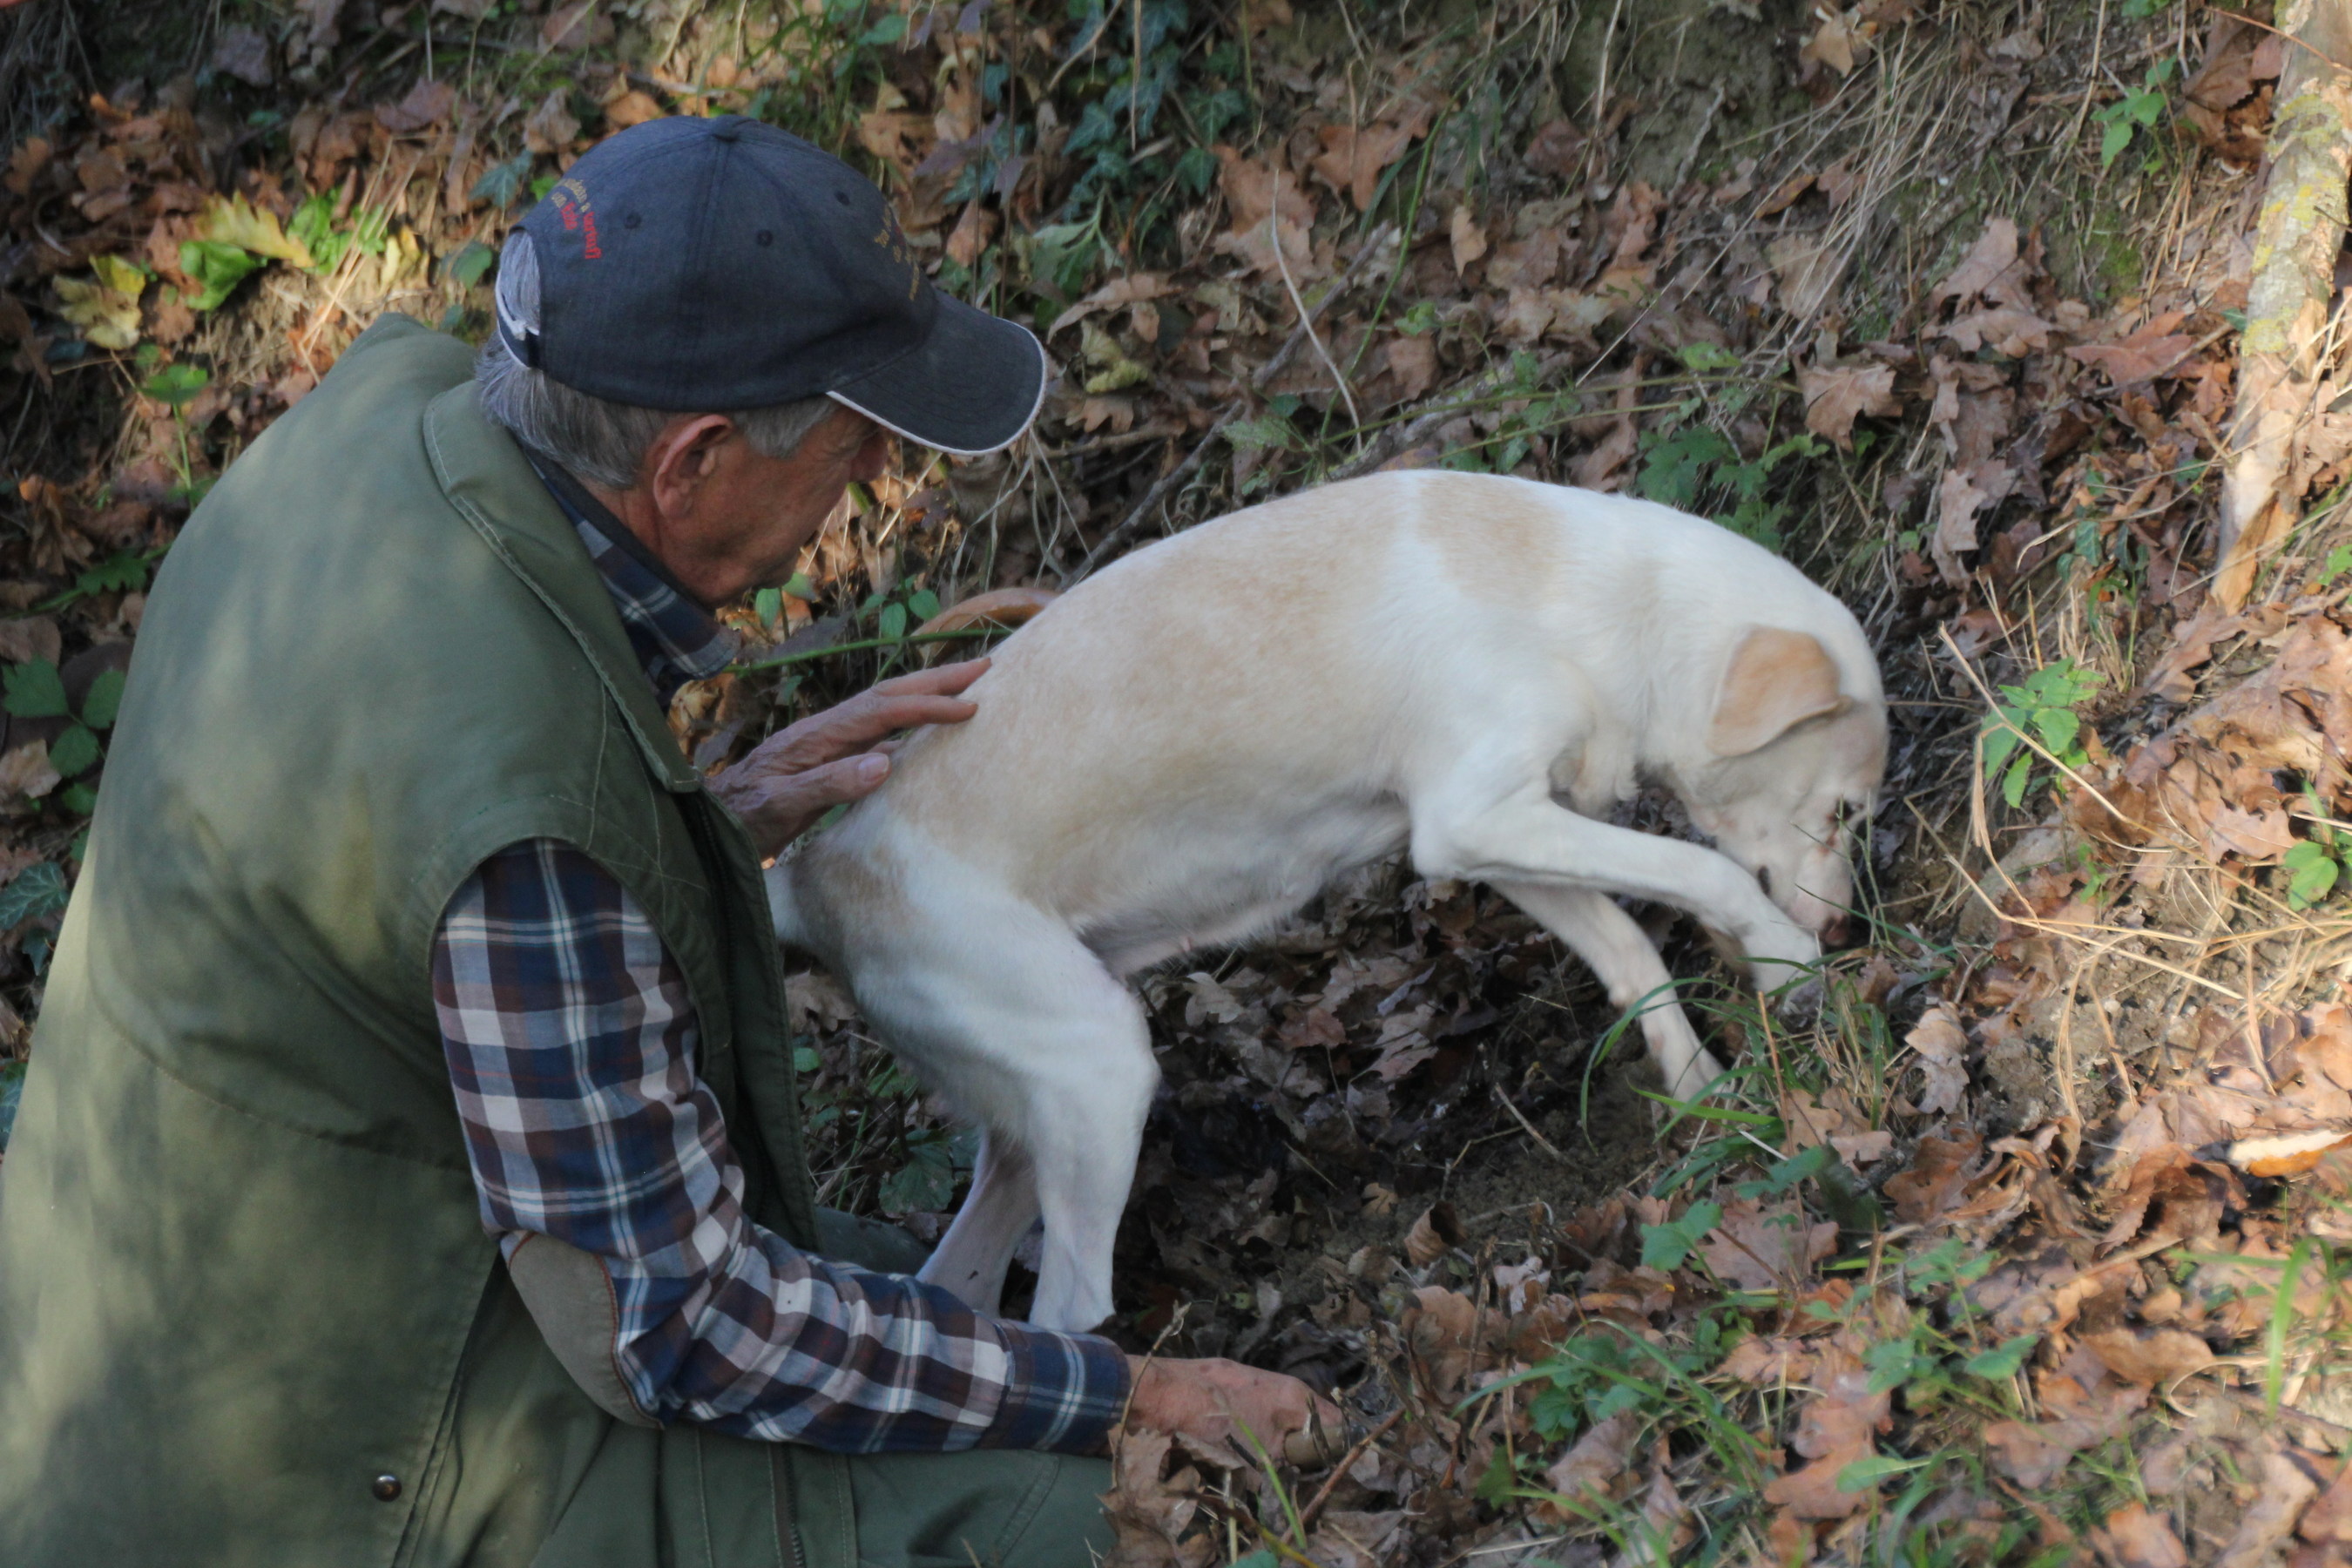 Celebrity Cruises searches for white truffles with a truffle hunter and Jolly, the truffle-hunting dog, near Alba, Italy.